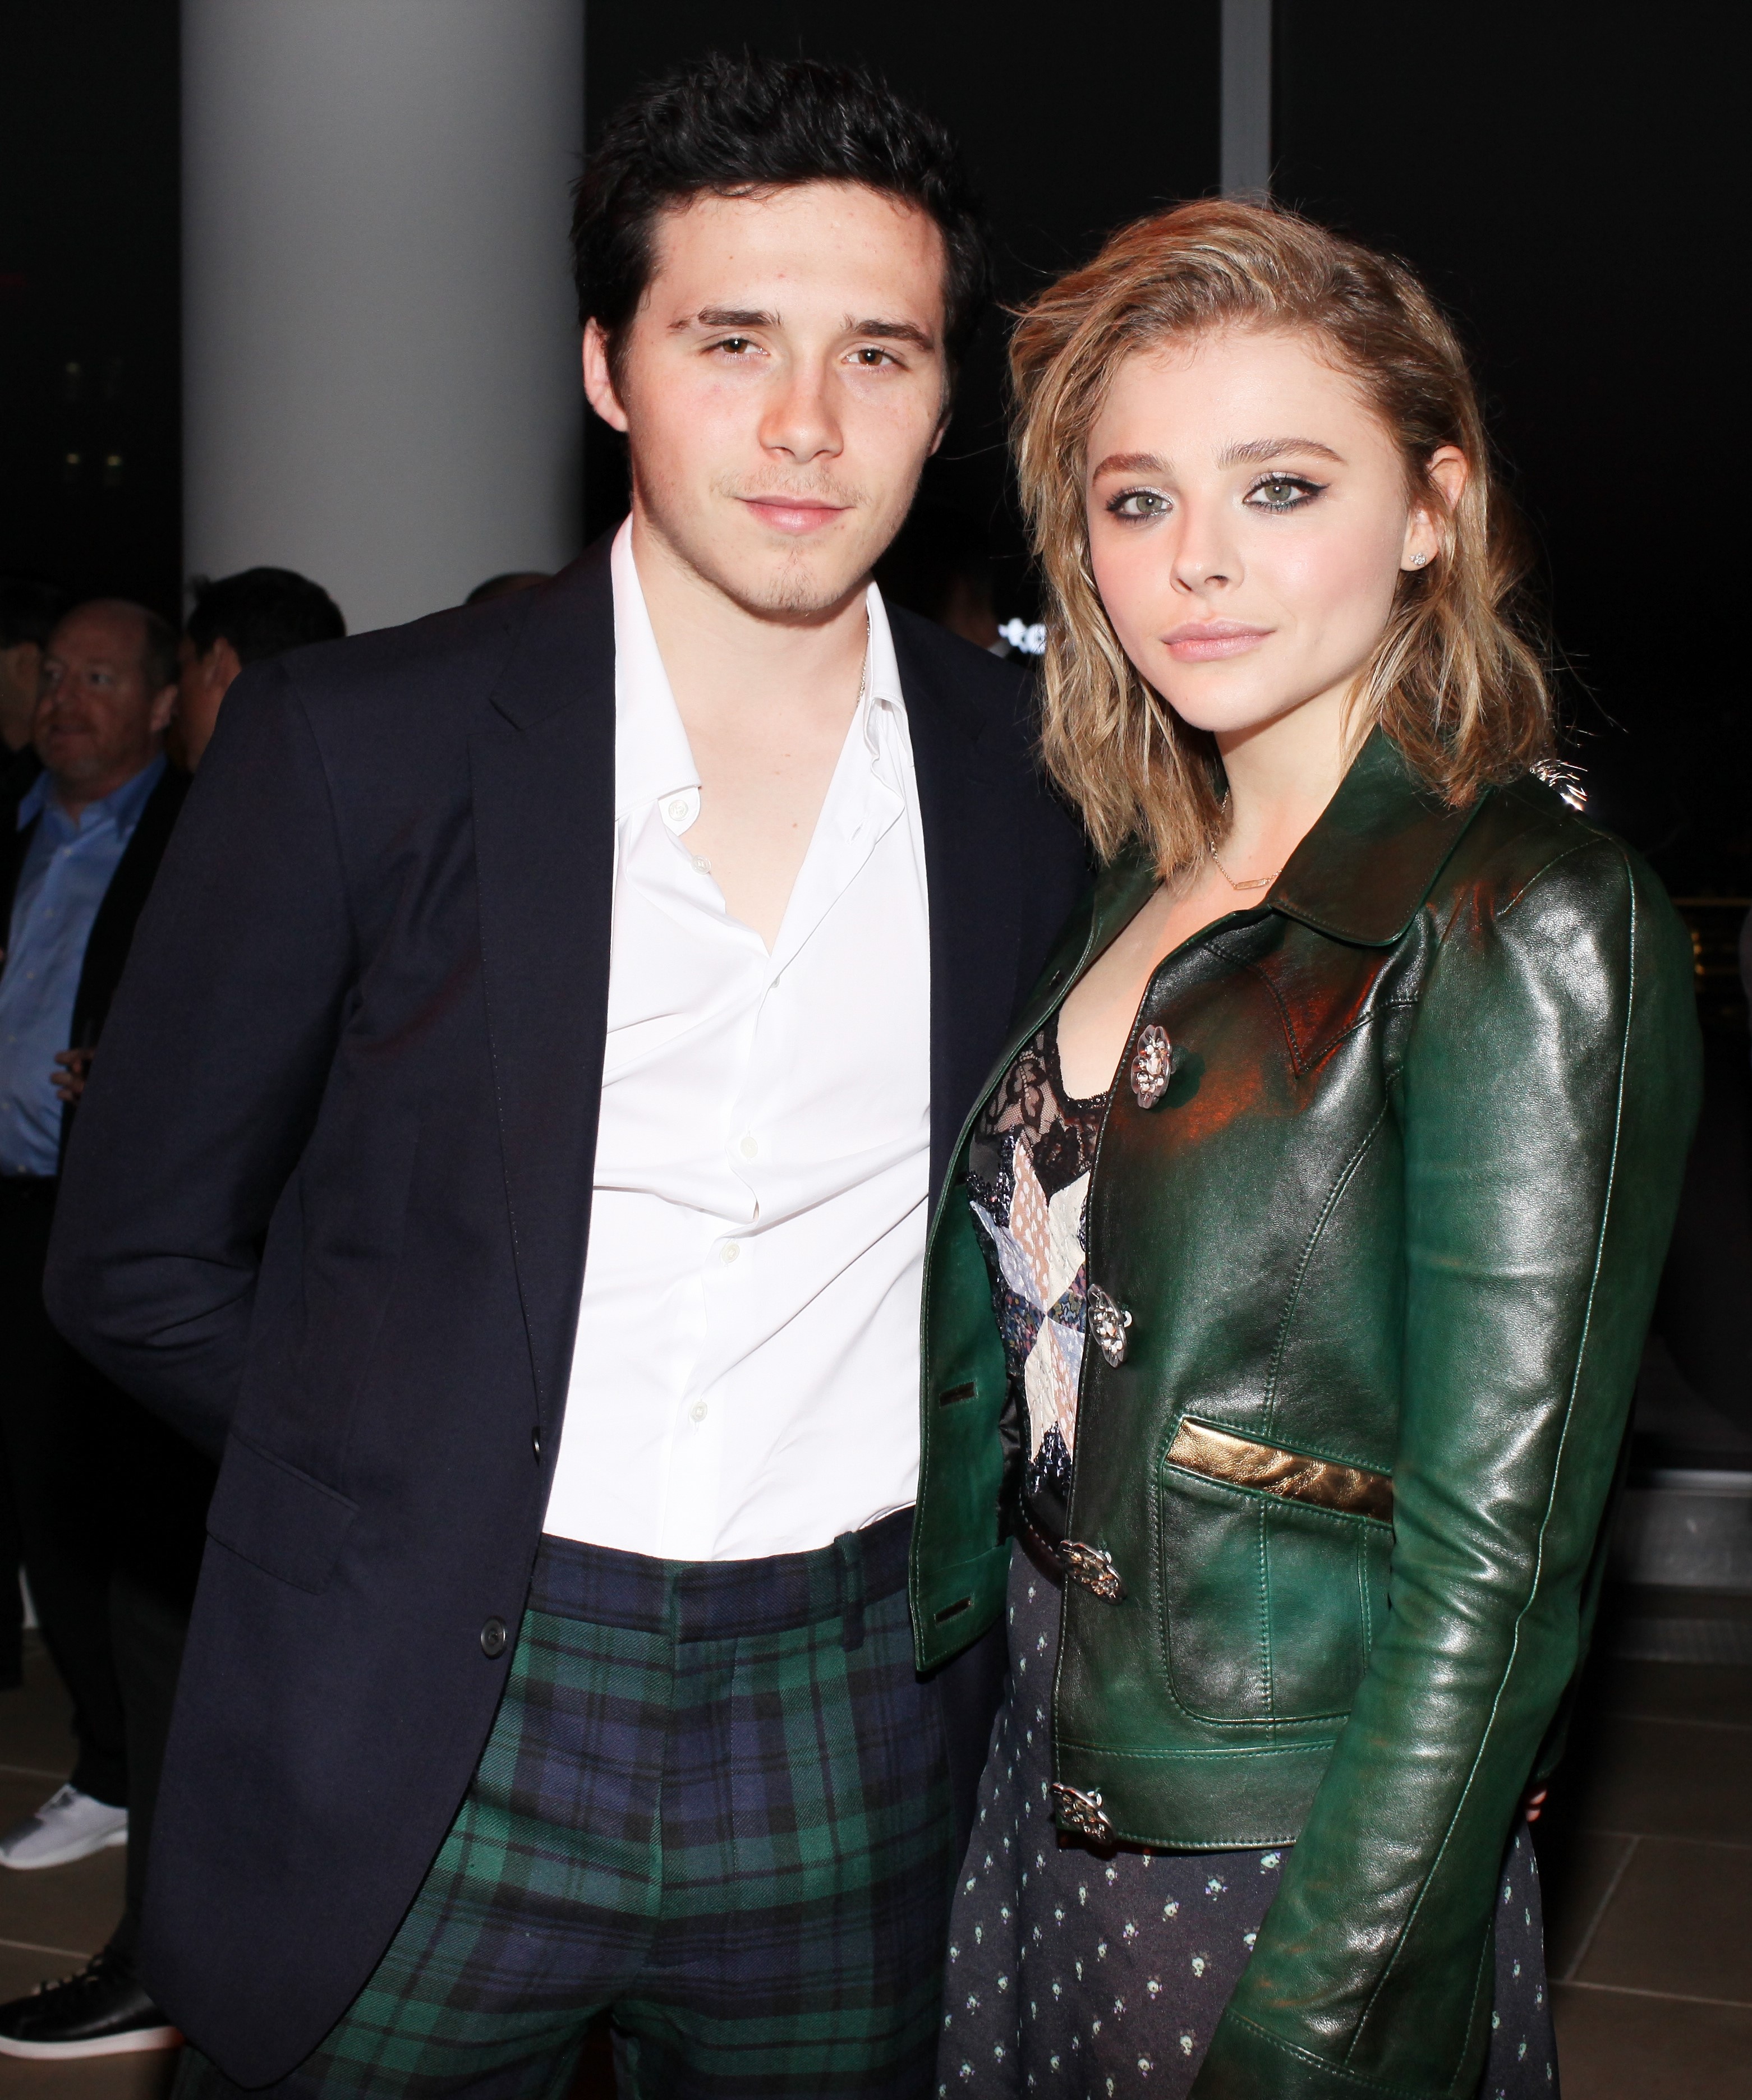 Chloe Grace Moretz and Brooklyn Beckham Look Adorable for 